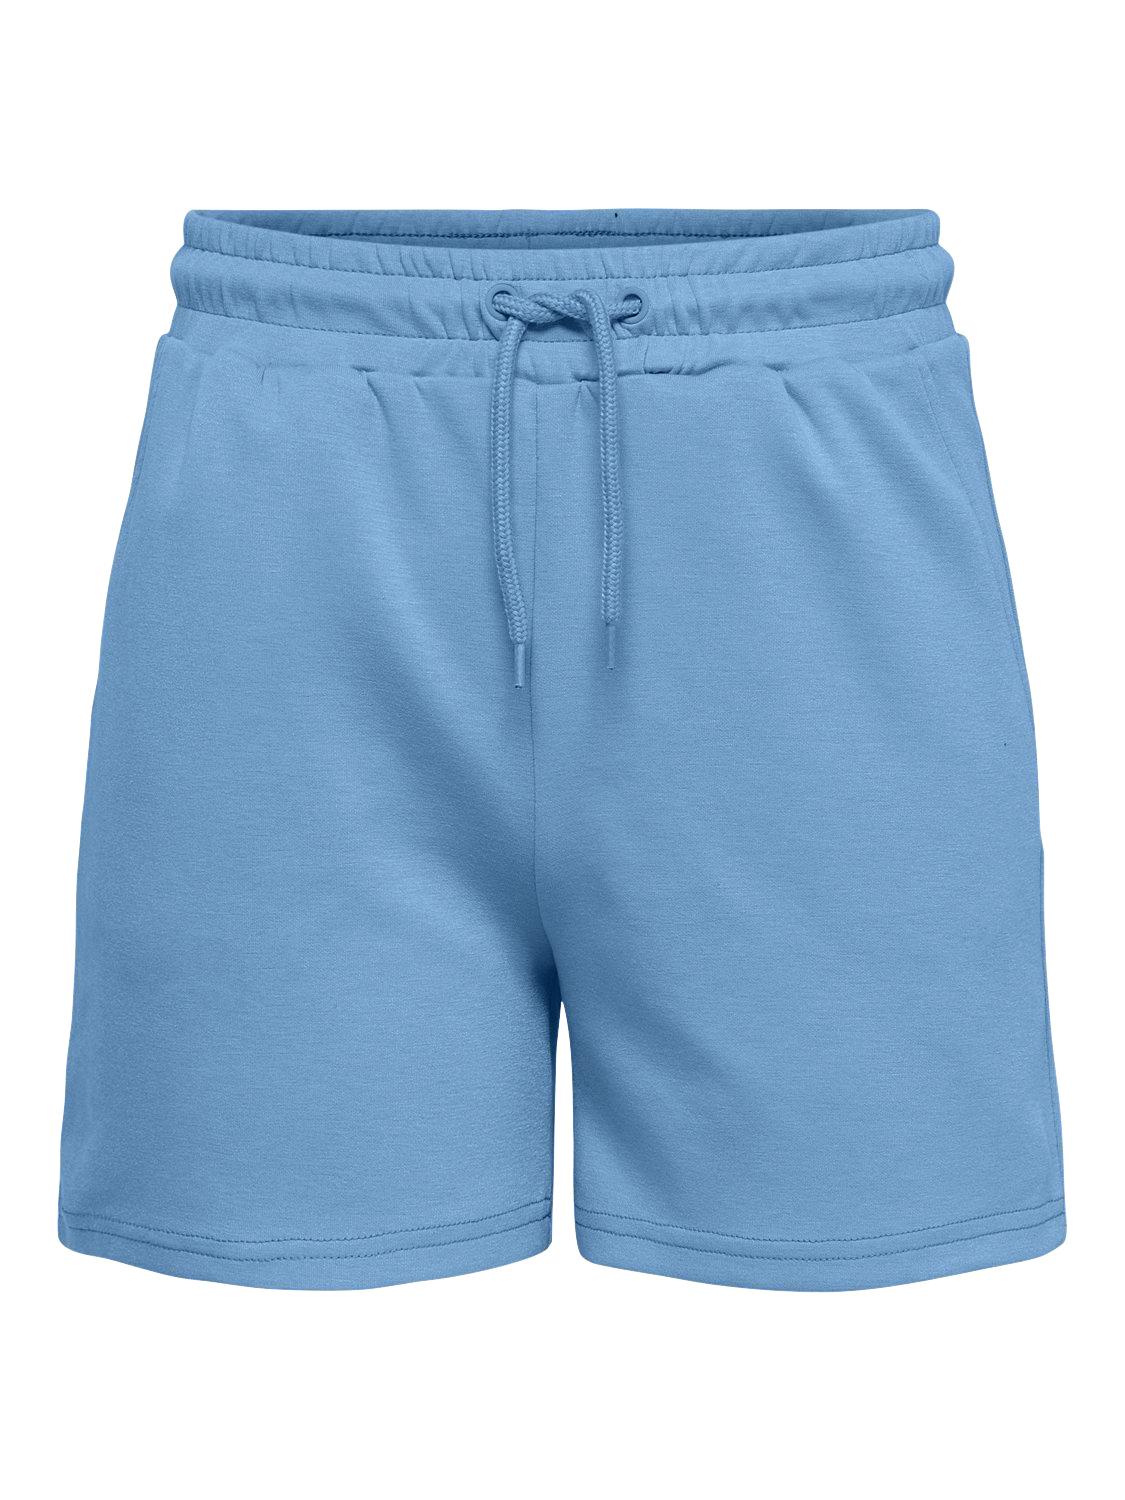 ONLY Loose Fit High waist Shorts -Blissful Blue - 15245851